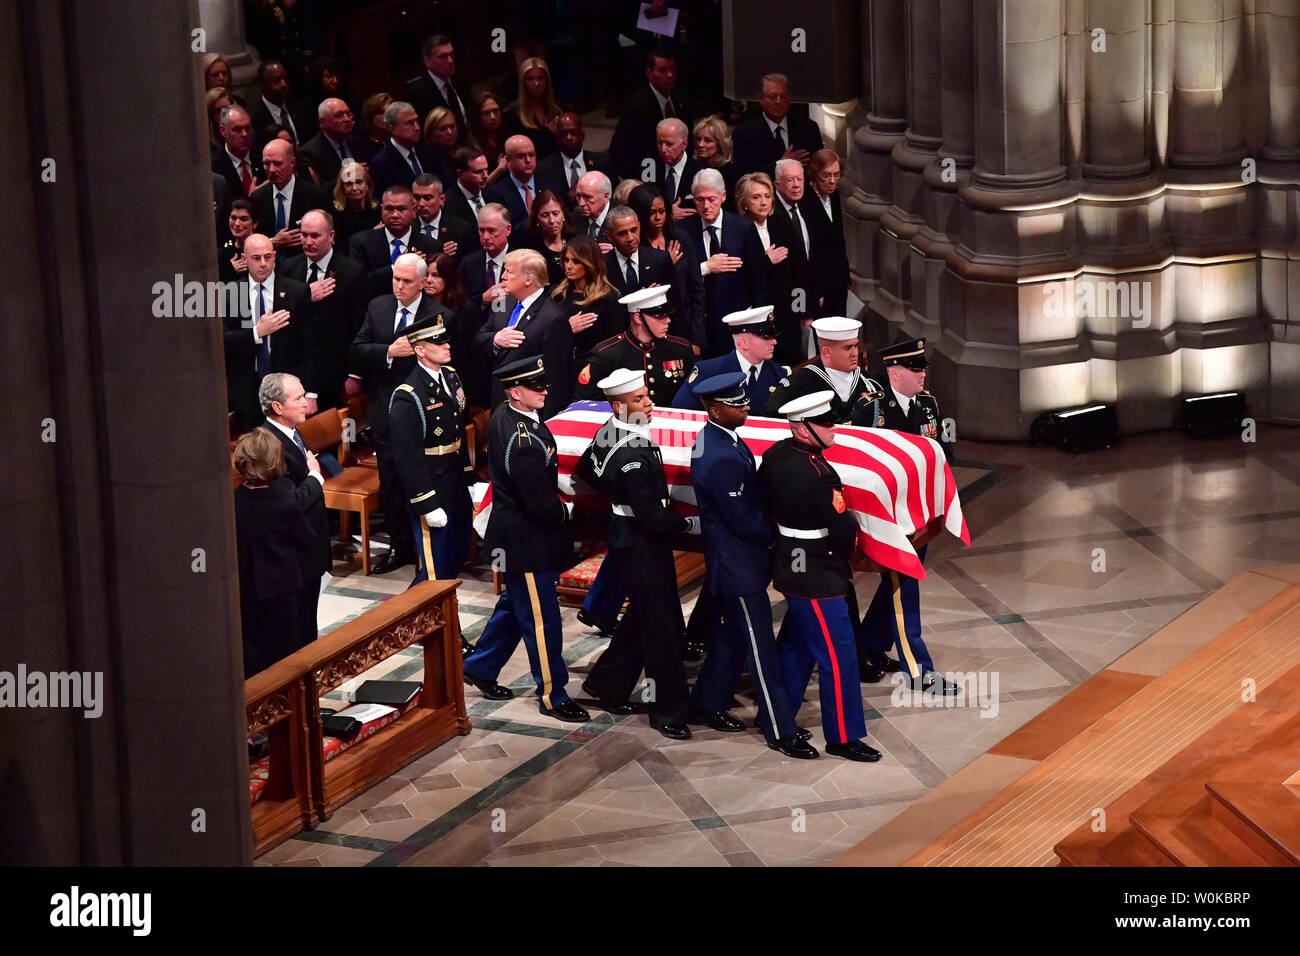 The casket arrives for the funeral of former President George H.W. Bush at the National Cathedral in Washington D.C. on December 5, 2018.   Photo by Kevin Dietsch/UPI Stock Photo